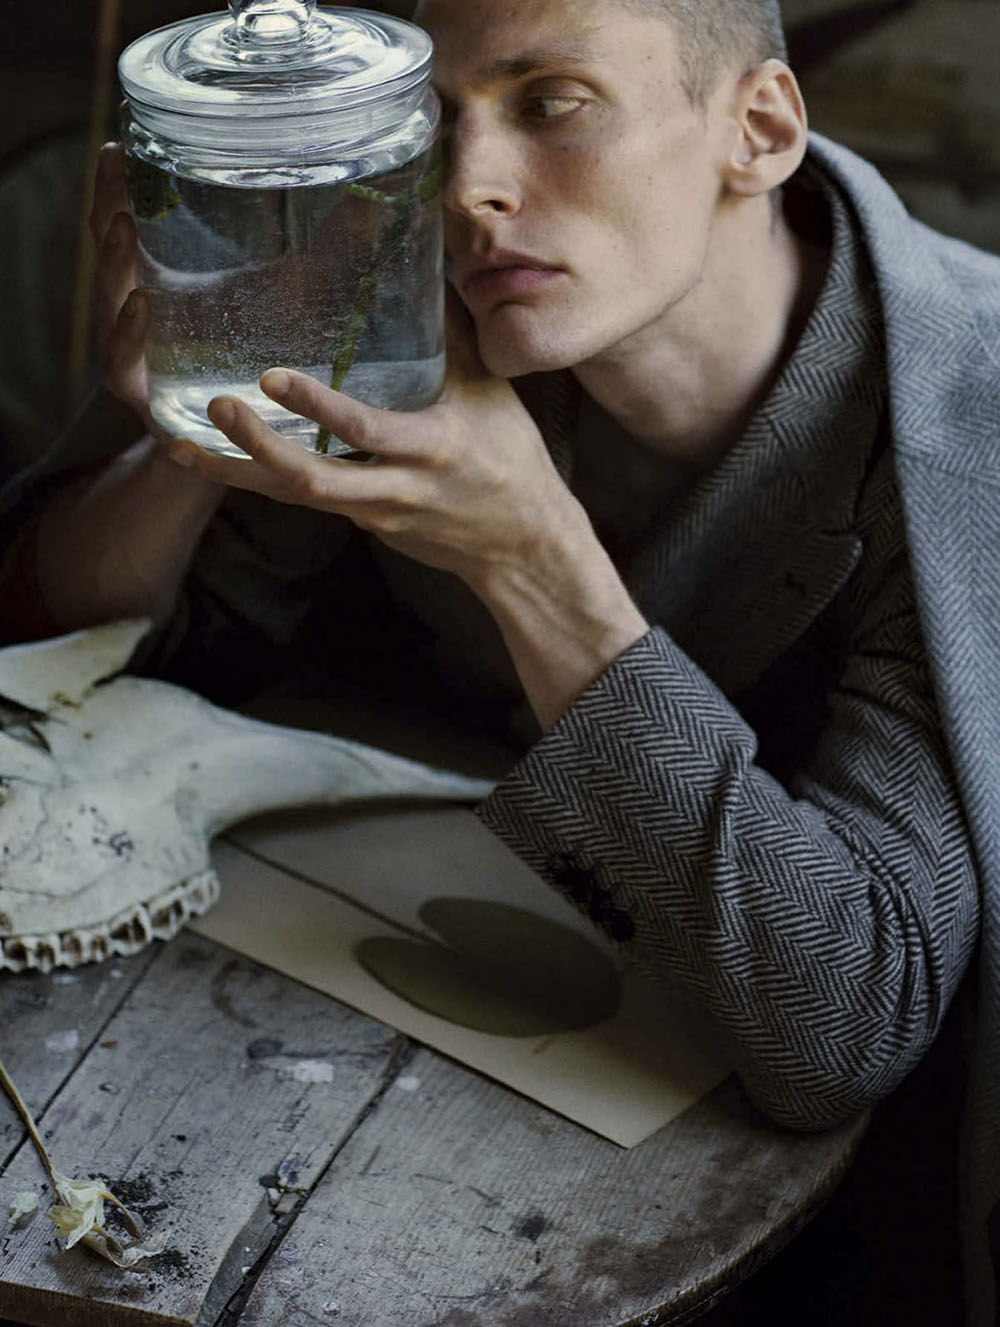 Tobias Lundh covers L’Uomo Vogue October 2020 by Julia Hetta